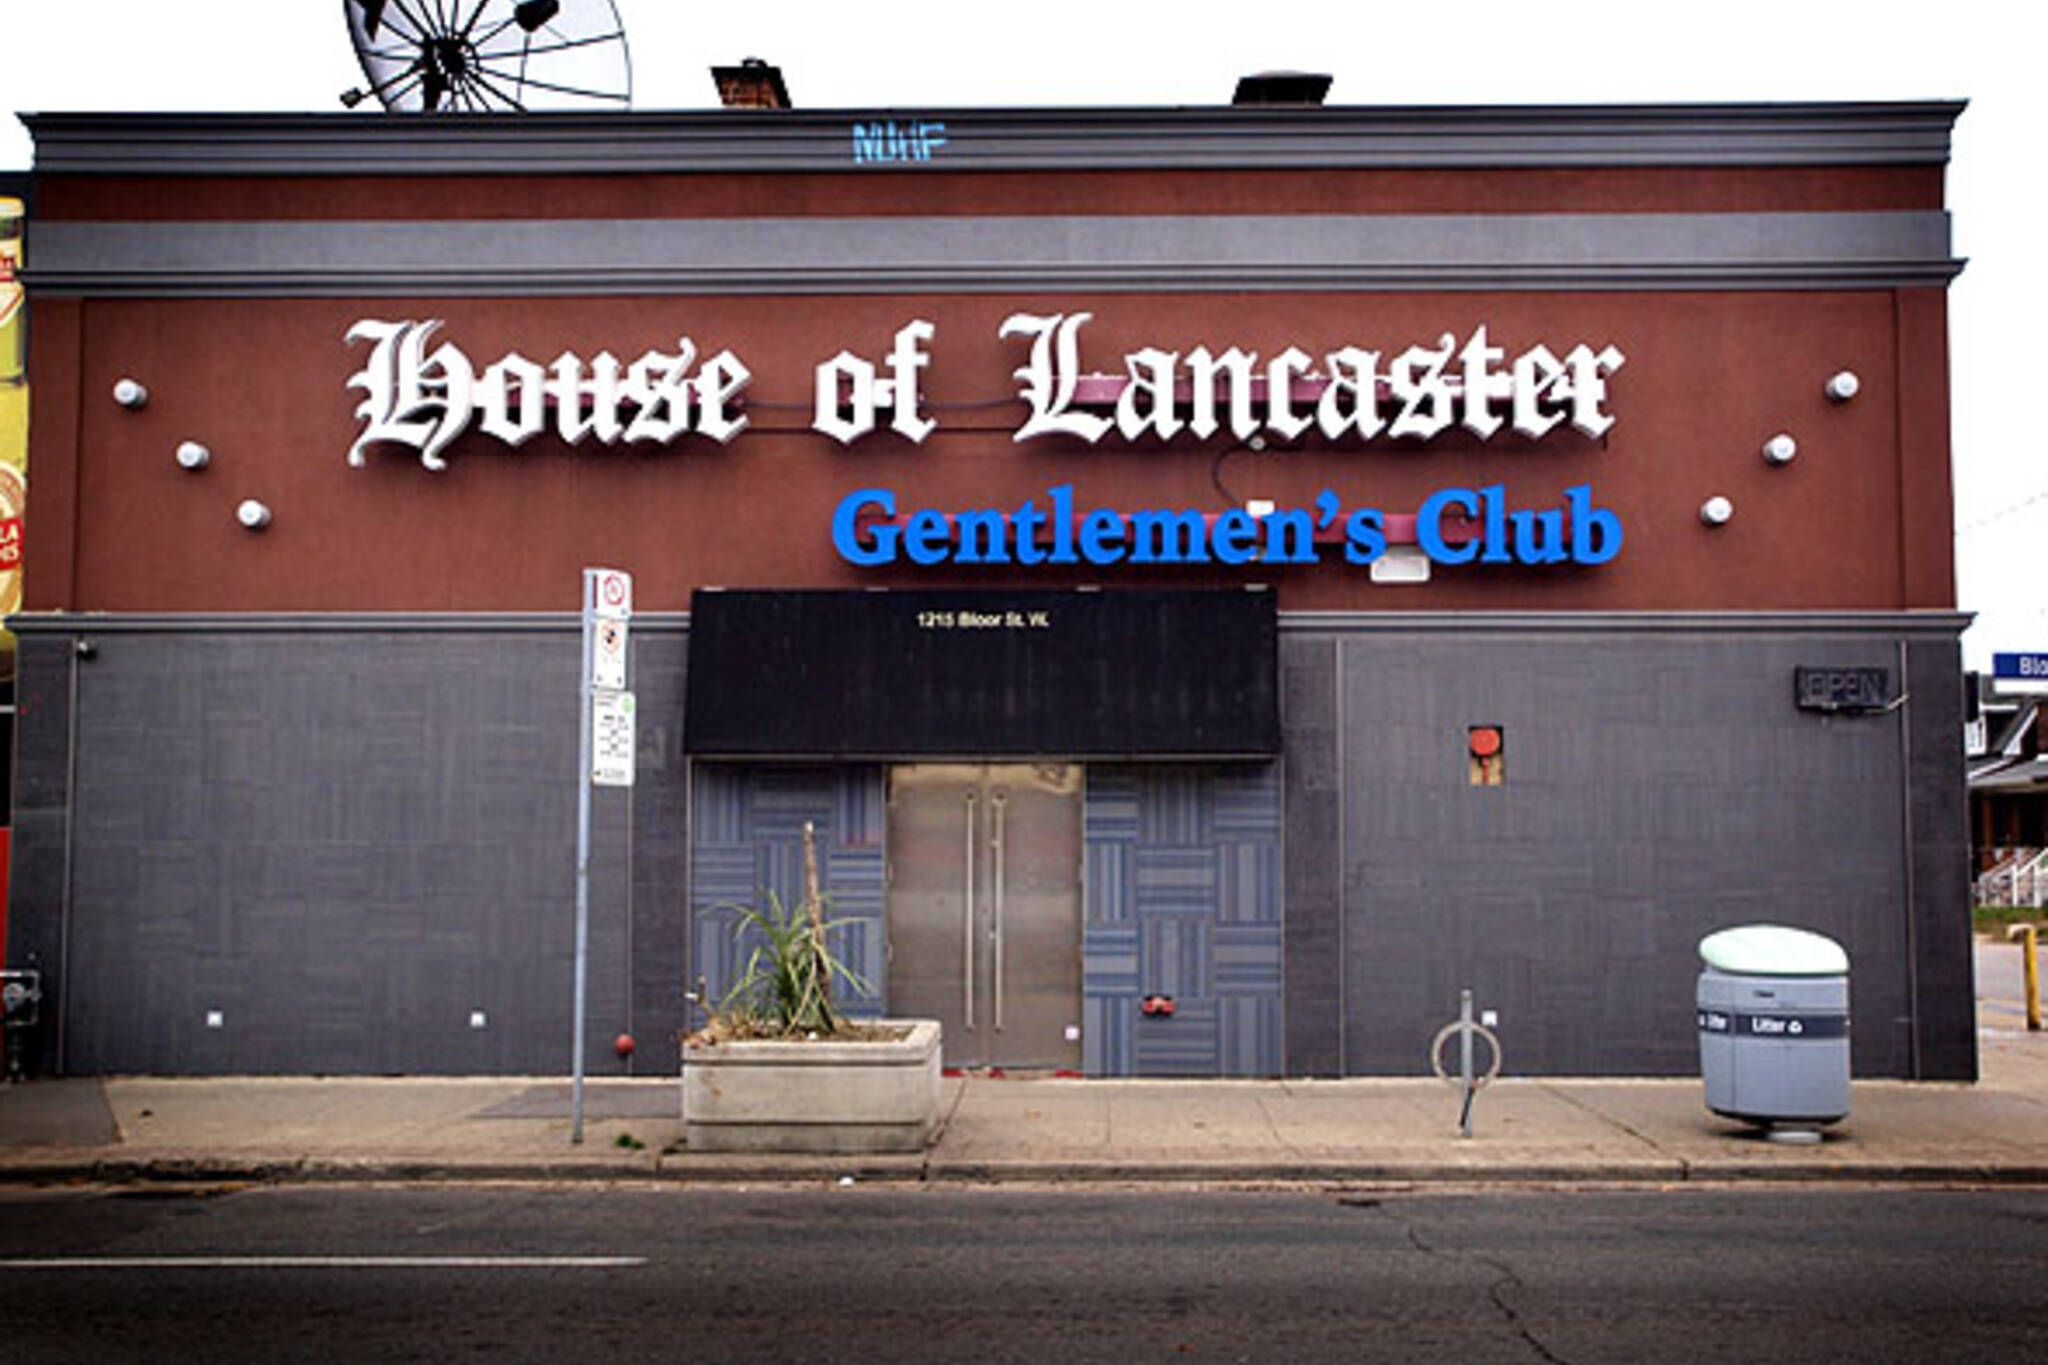 House of Lancaster